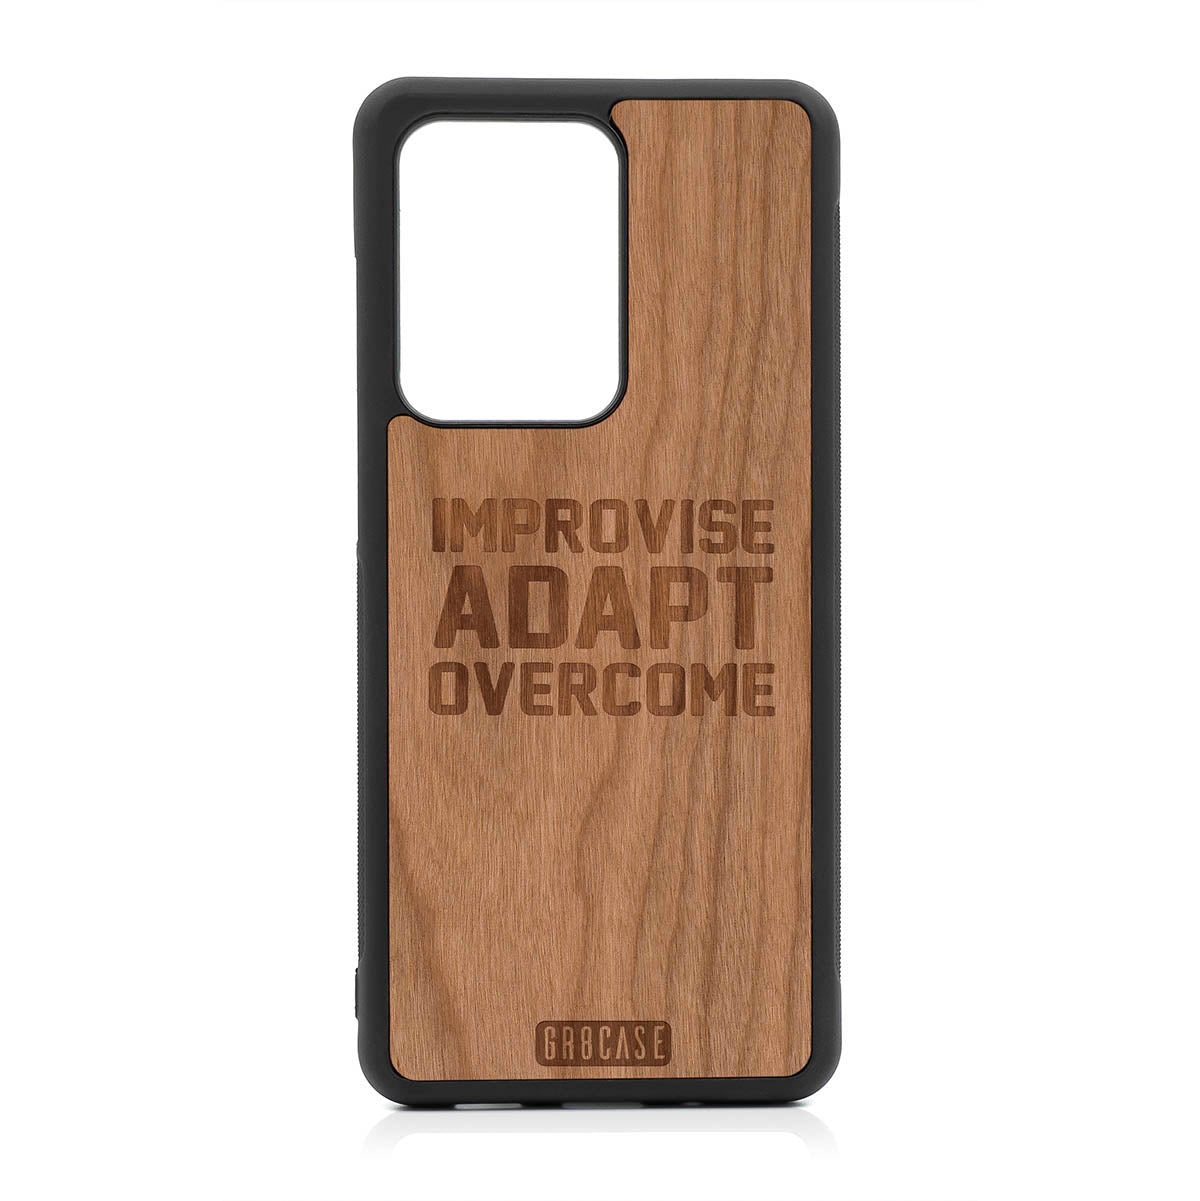 Improvise Adapt Overcome Design Wood Case For Samsung Galaxy S20 Ultra